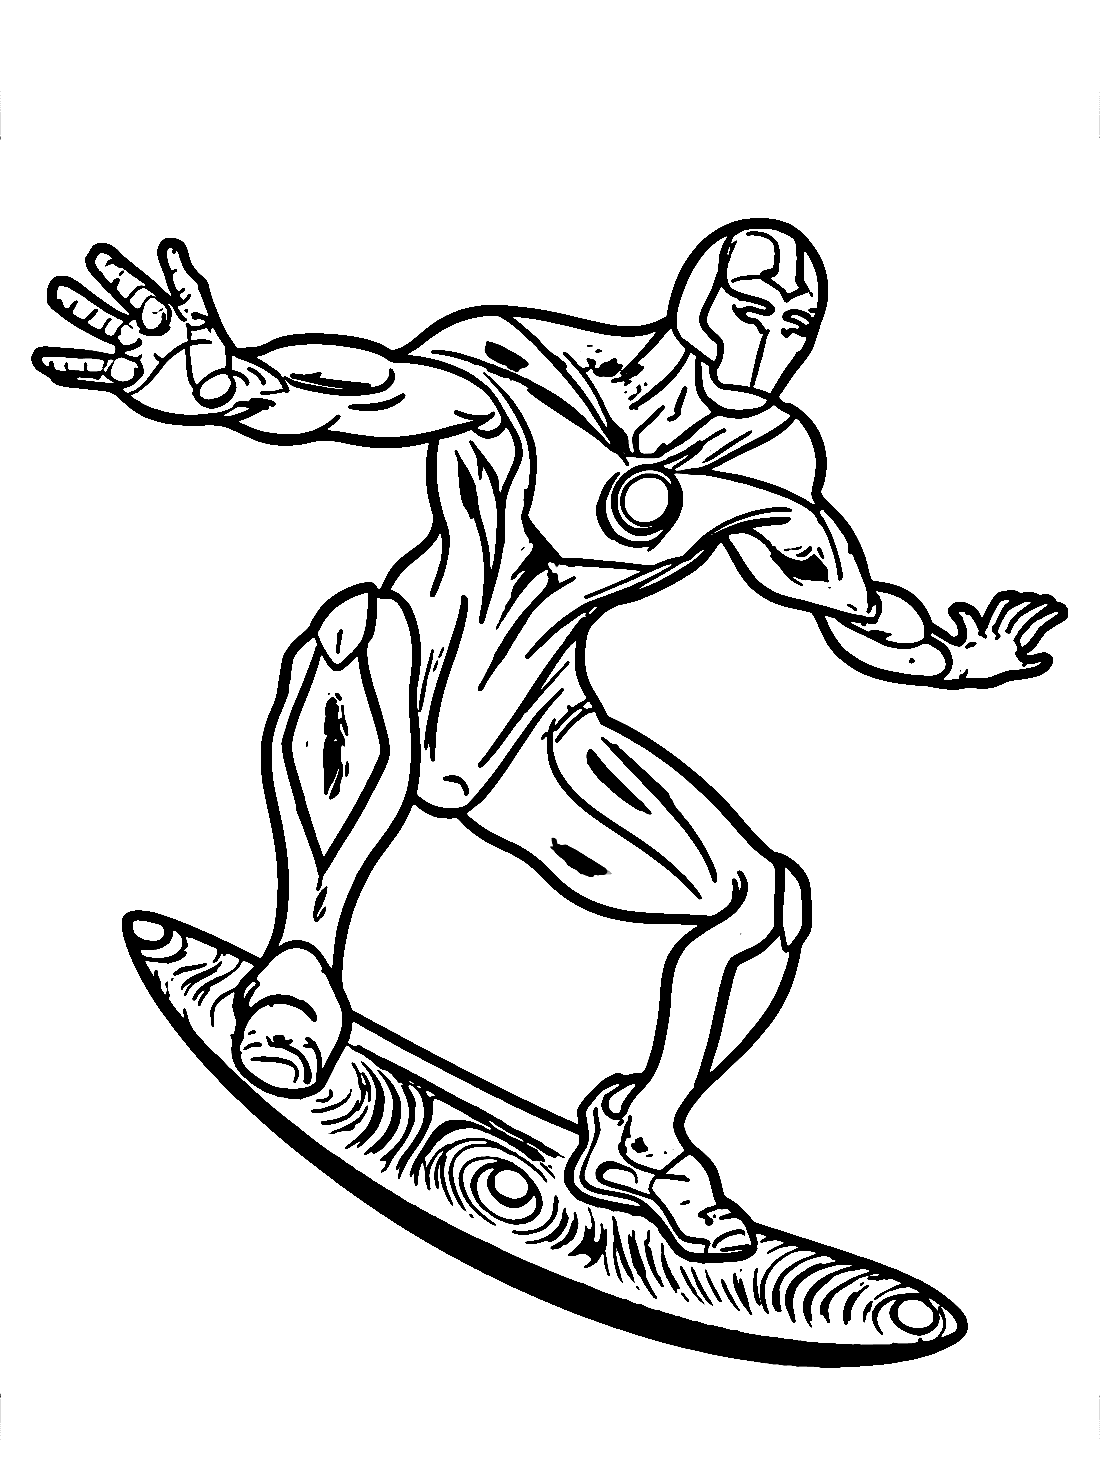 Rise of the silver surfer-cast